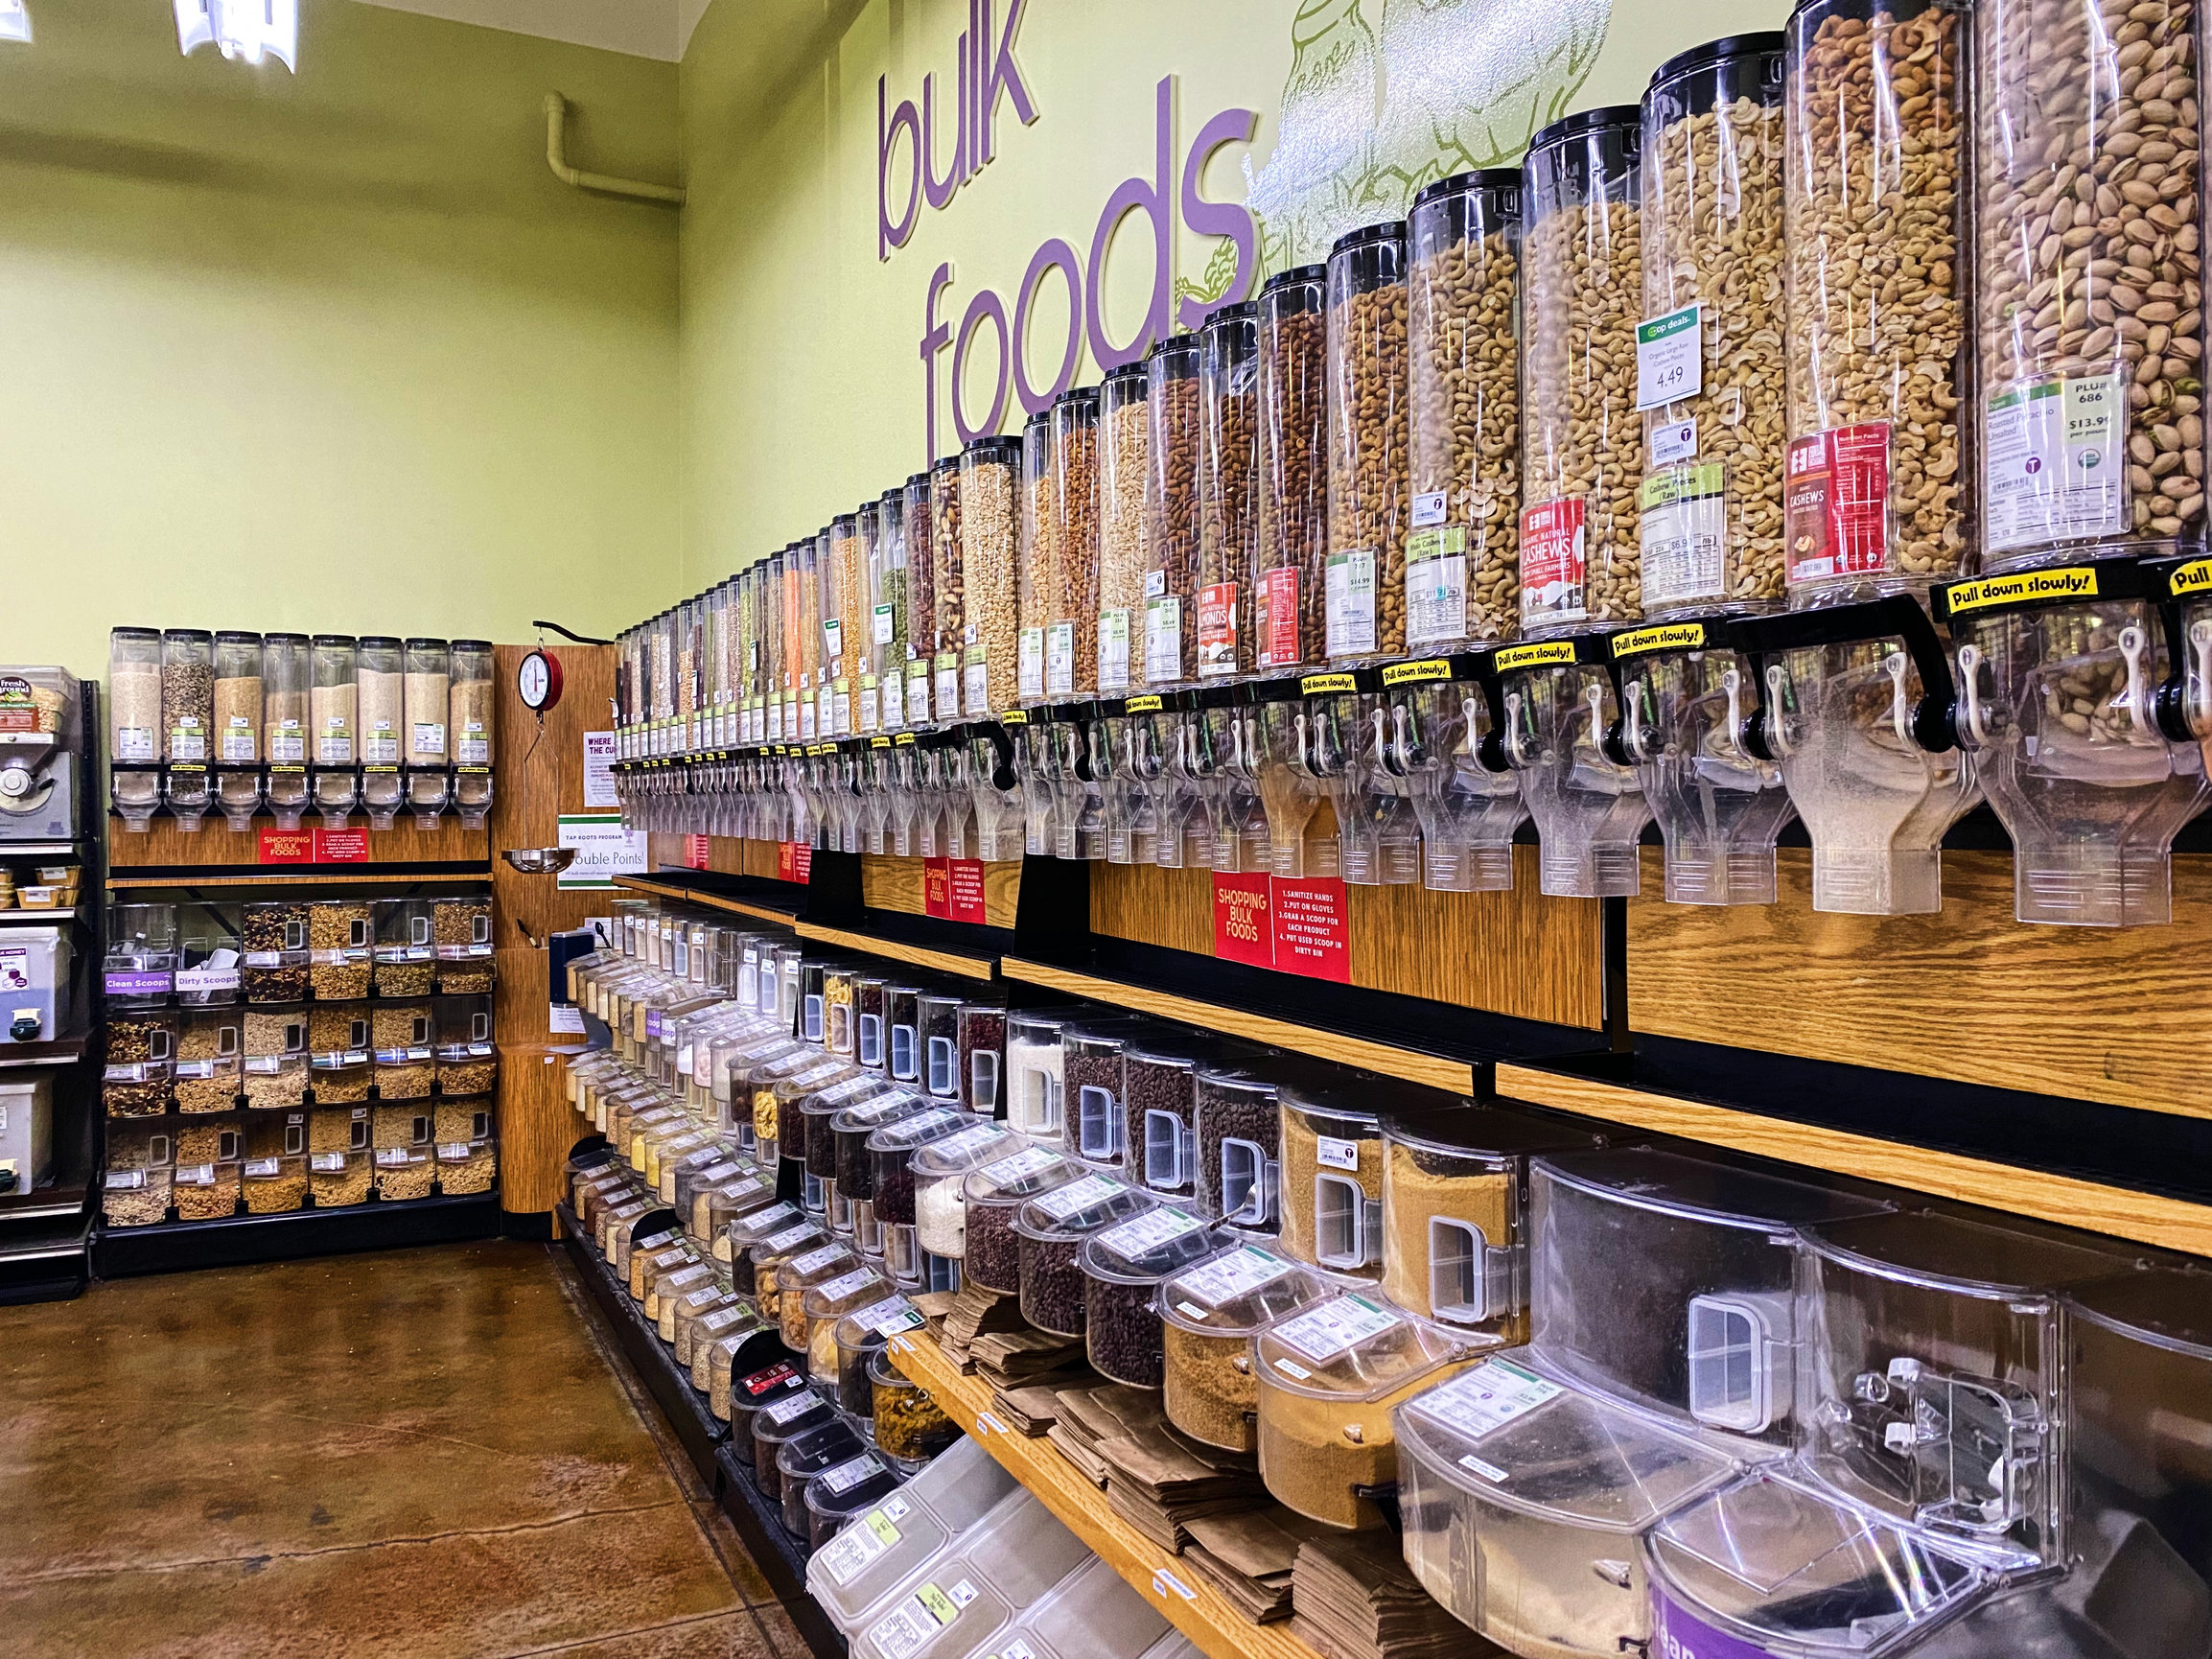 Here's a heaping scoop of knowledge about buying bulk foods